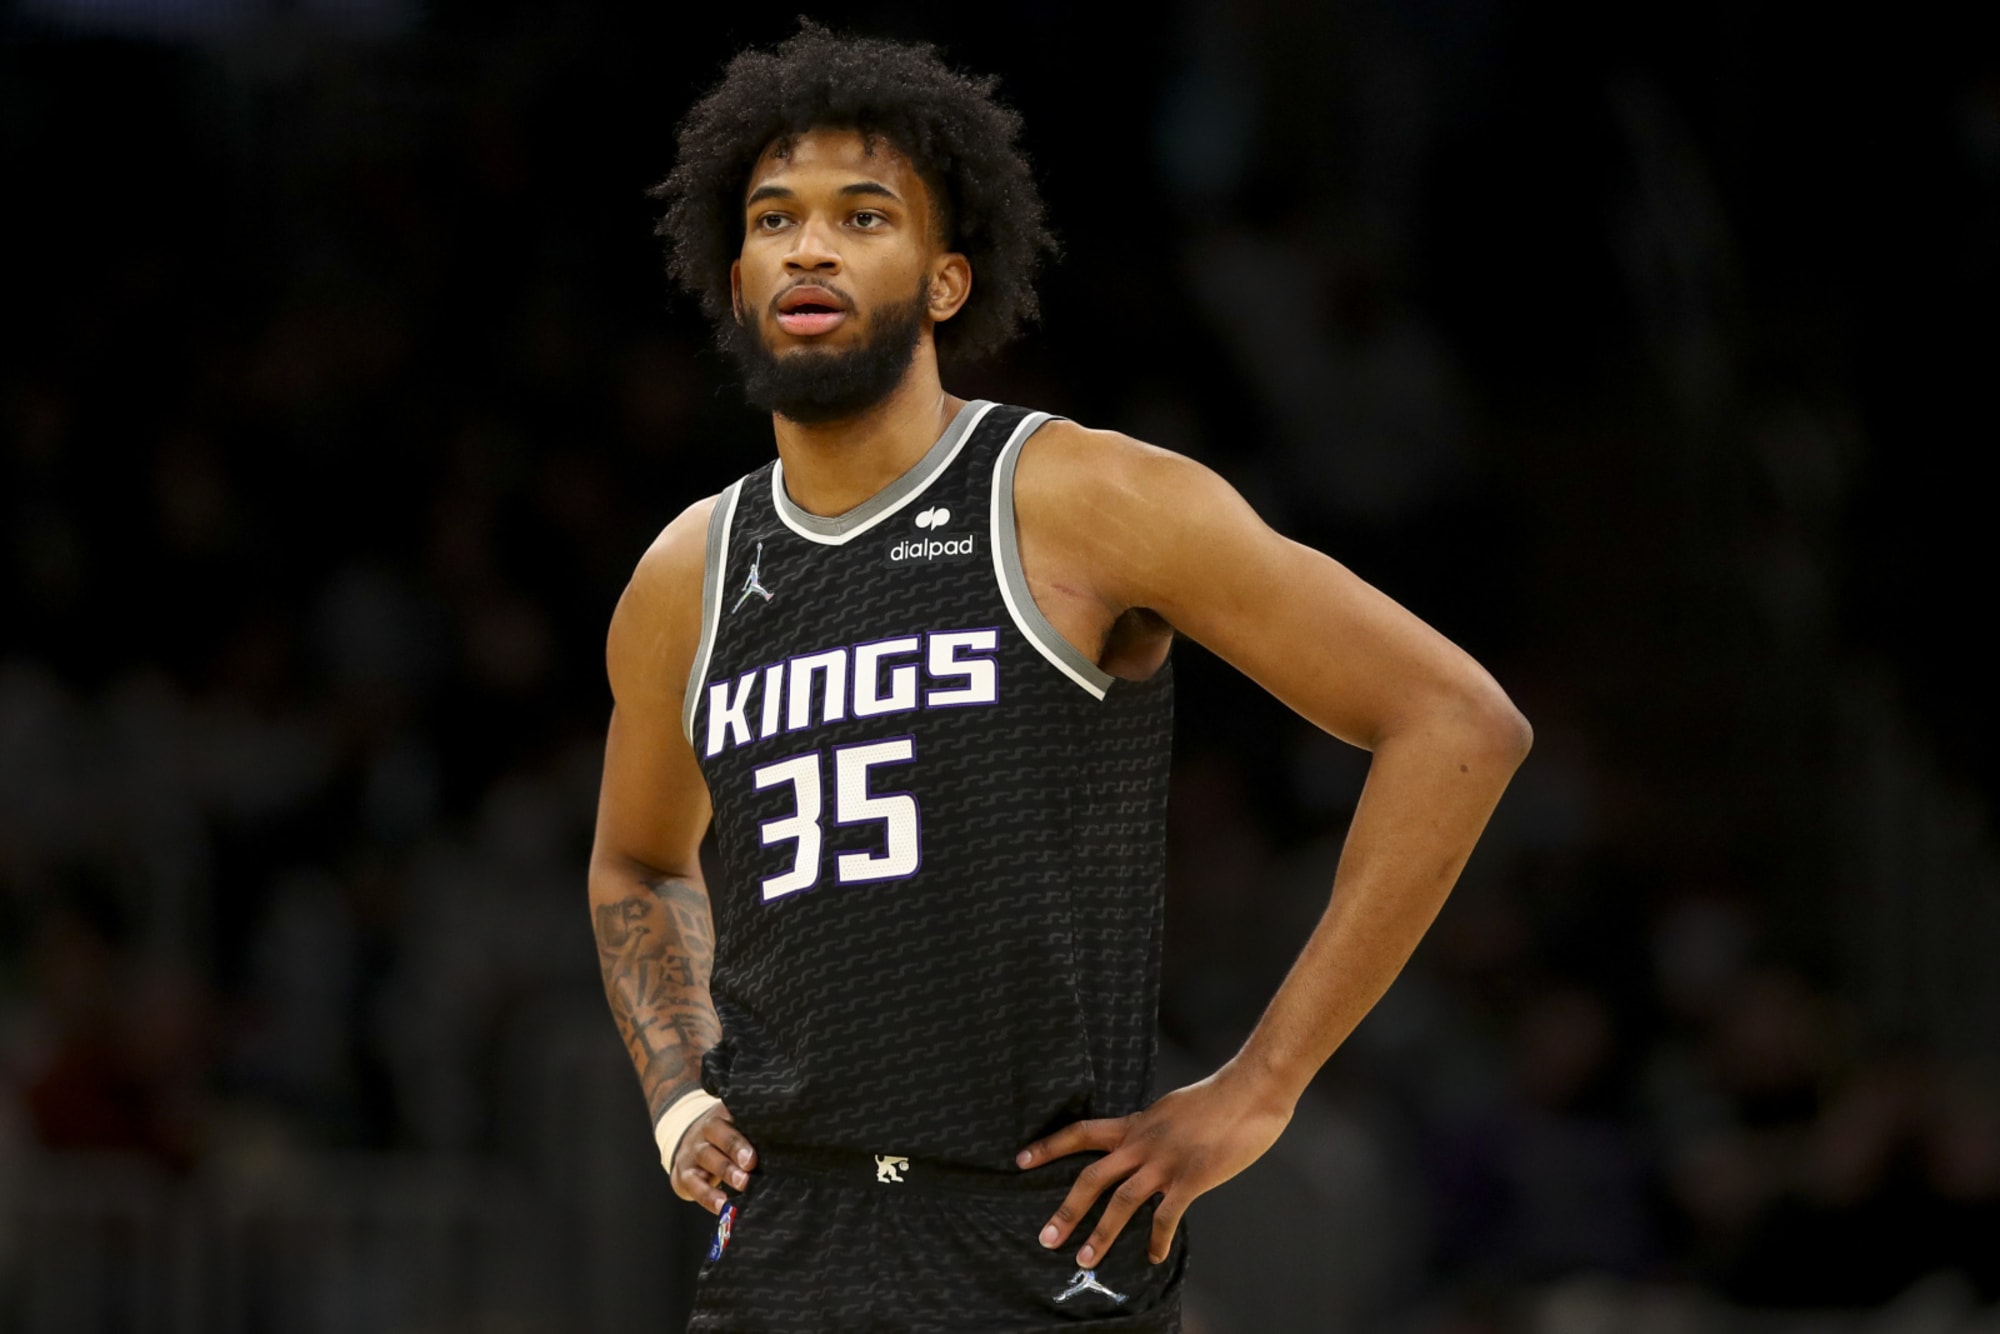 Why did the Kings bench Marvin Bagley? Former No. 2 pick falls out